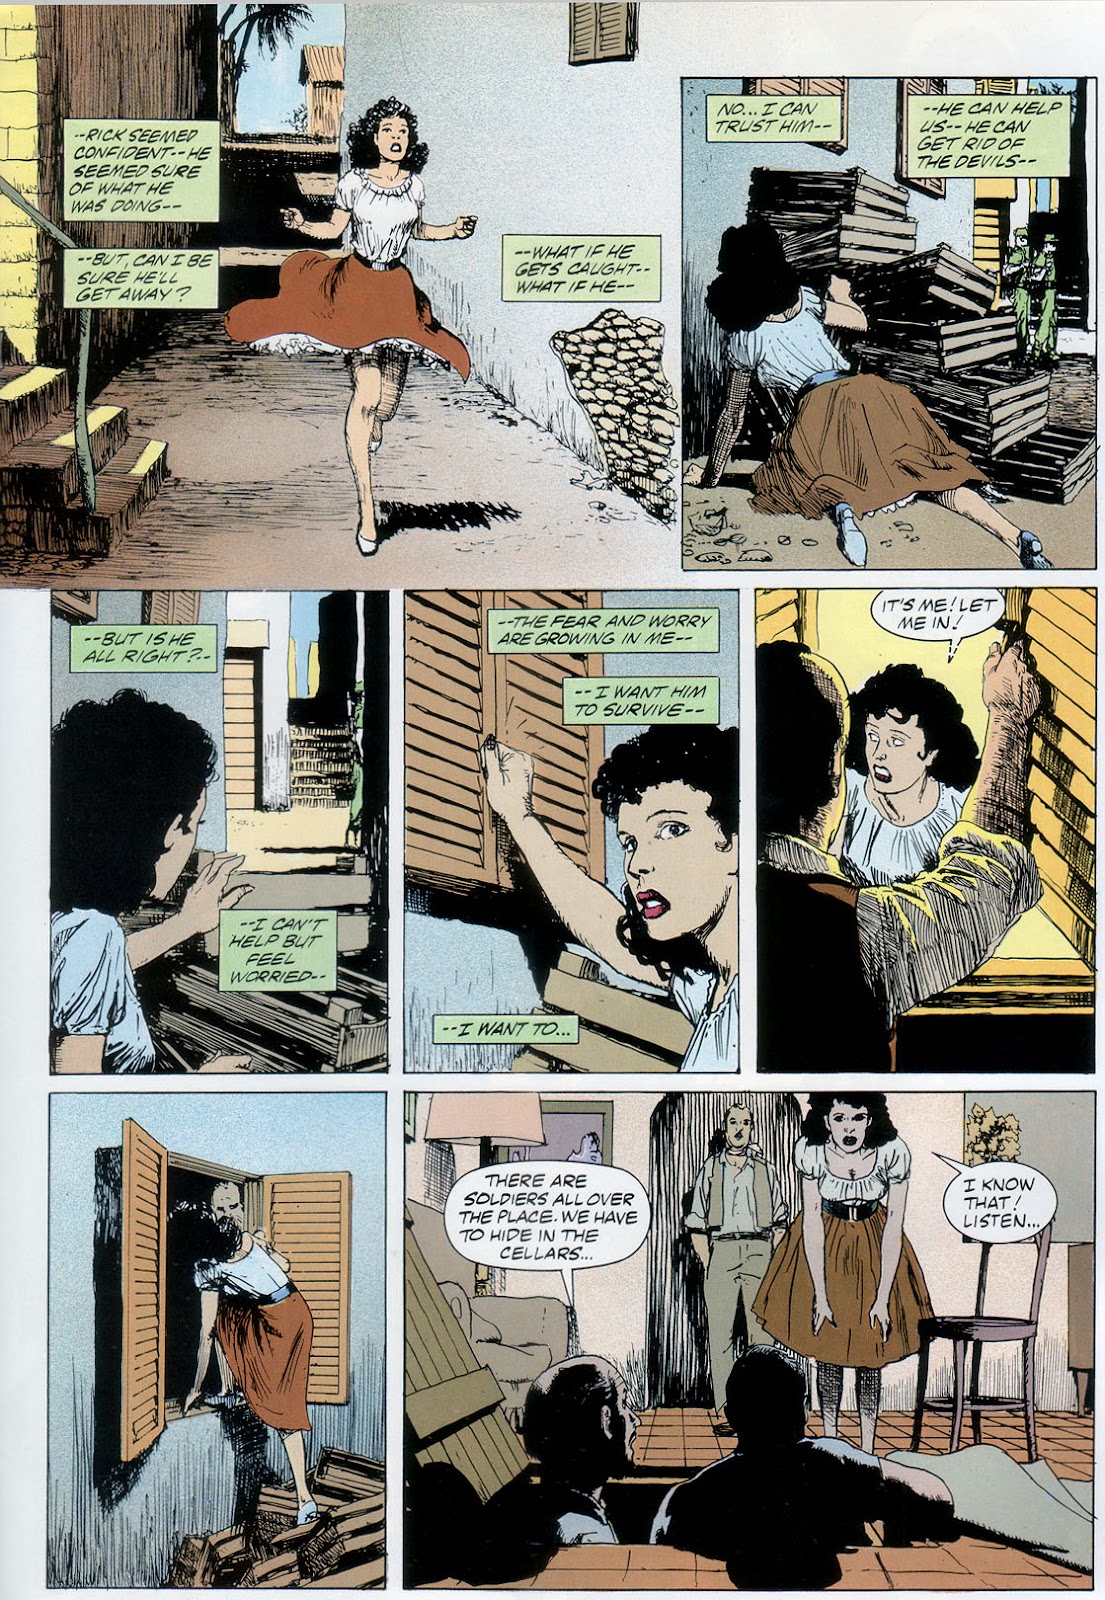 Marvel Graphic Novel issue 57 - Rick Mason - The Agent - Page 55